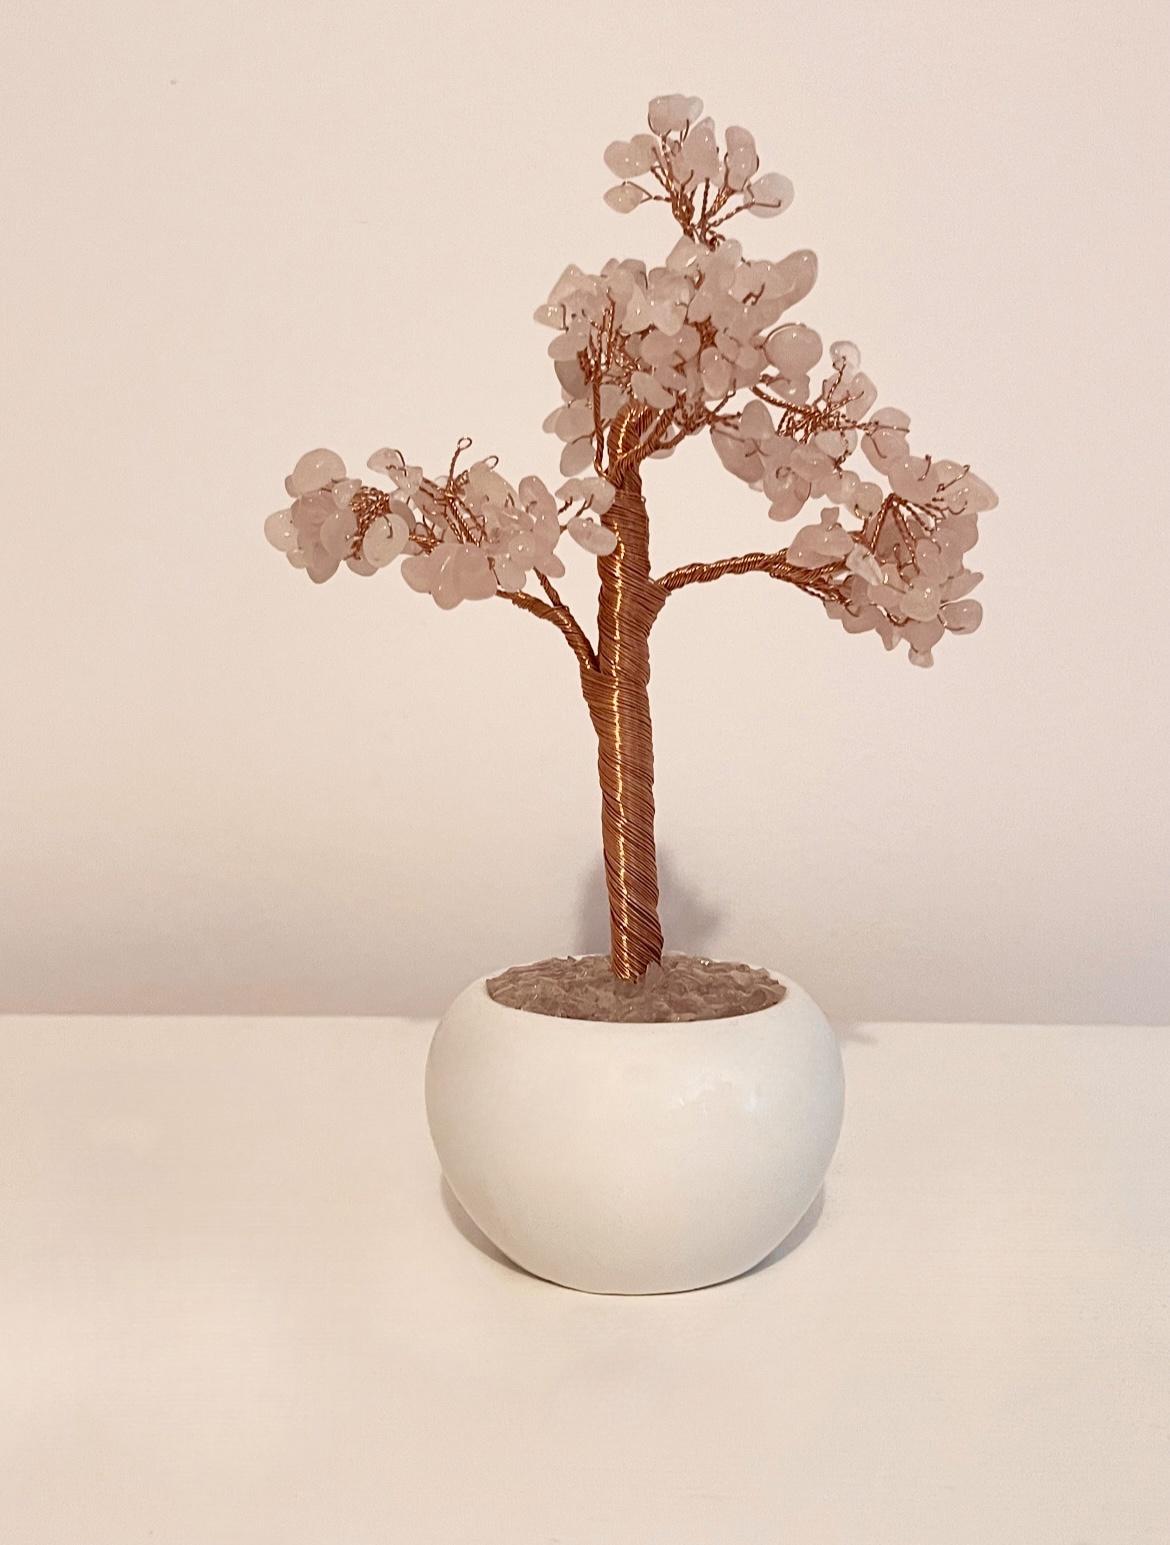 a miniture tree made out of rose quartz crystals and wire